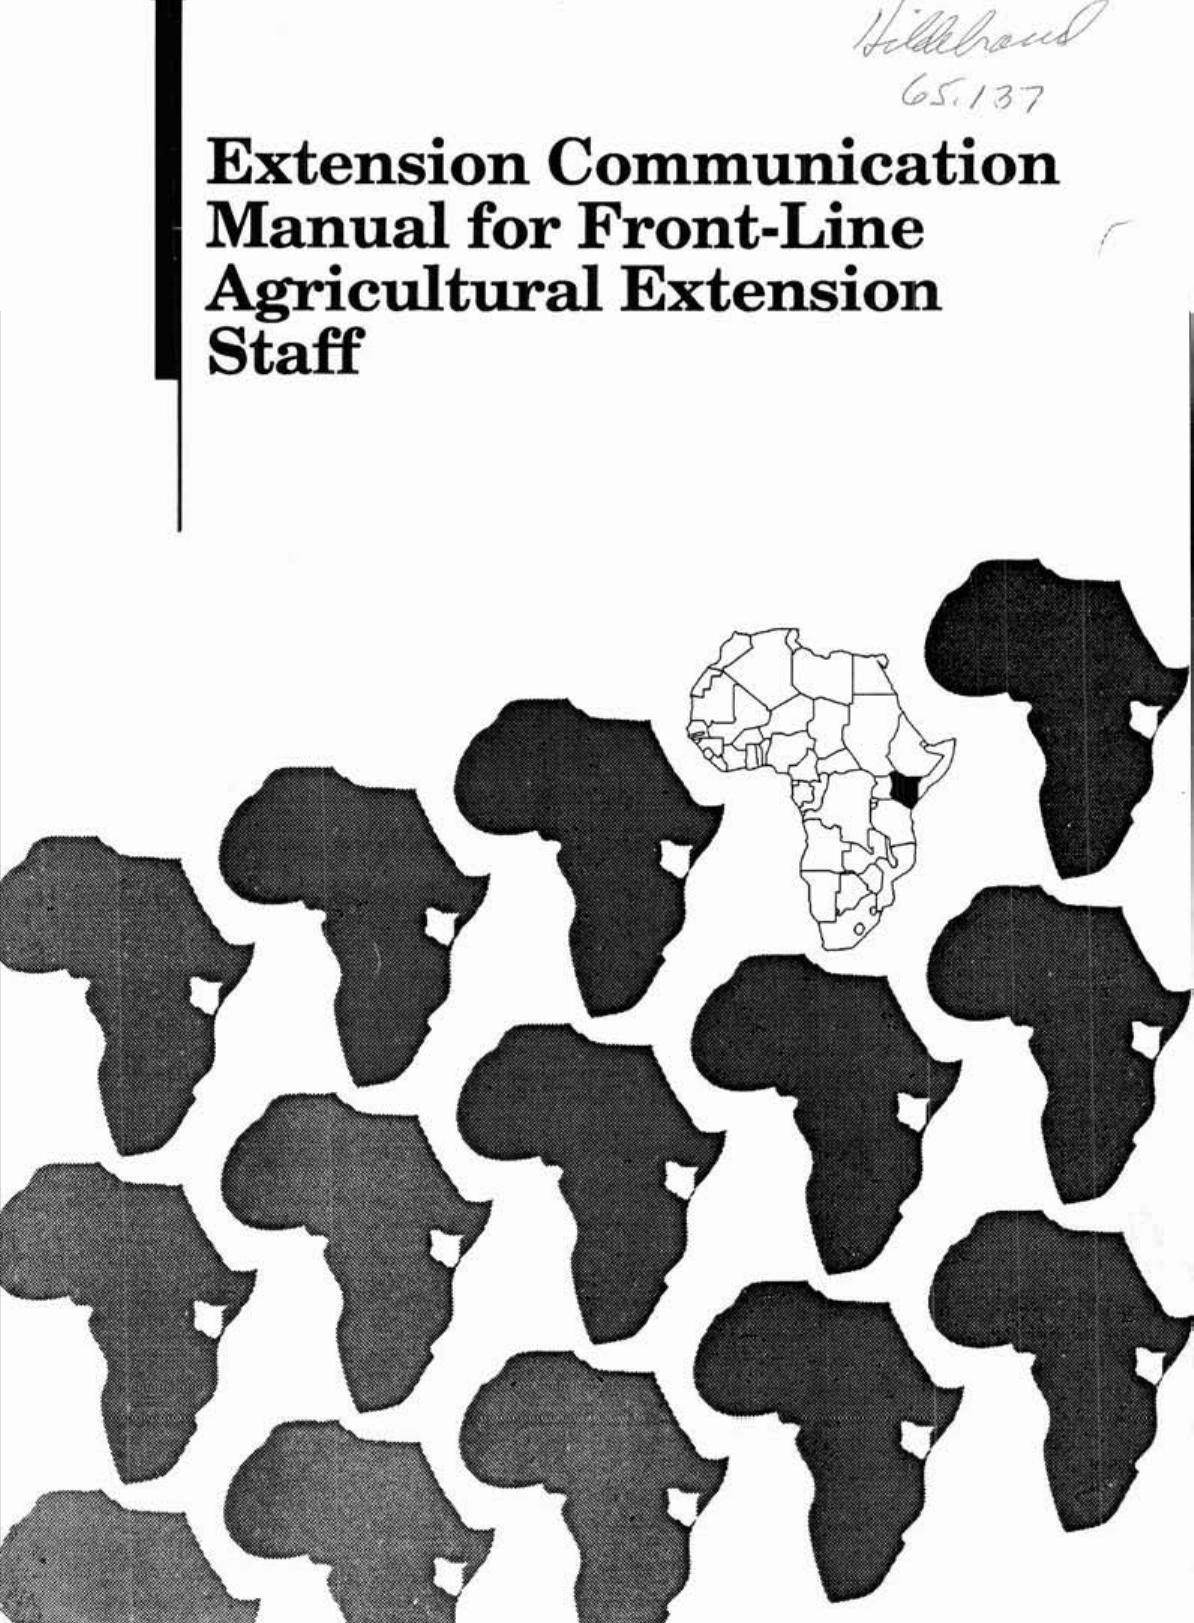 Extension Communication Manual for Front-Line Agricultural Extension Staff